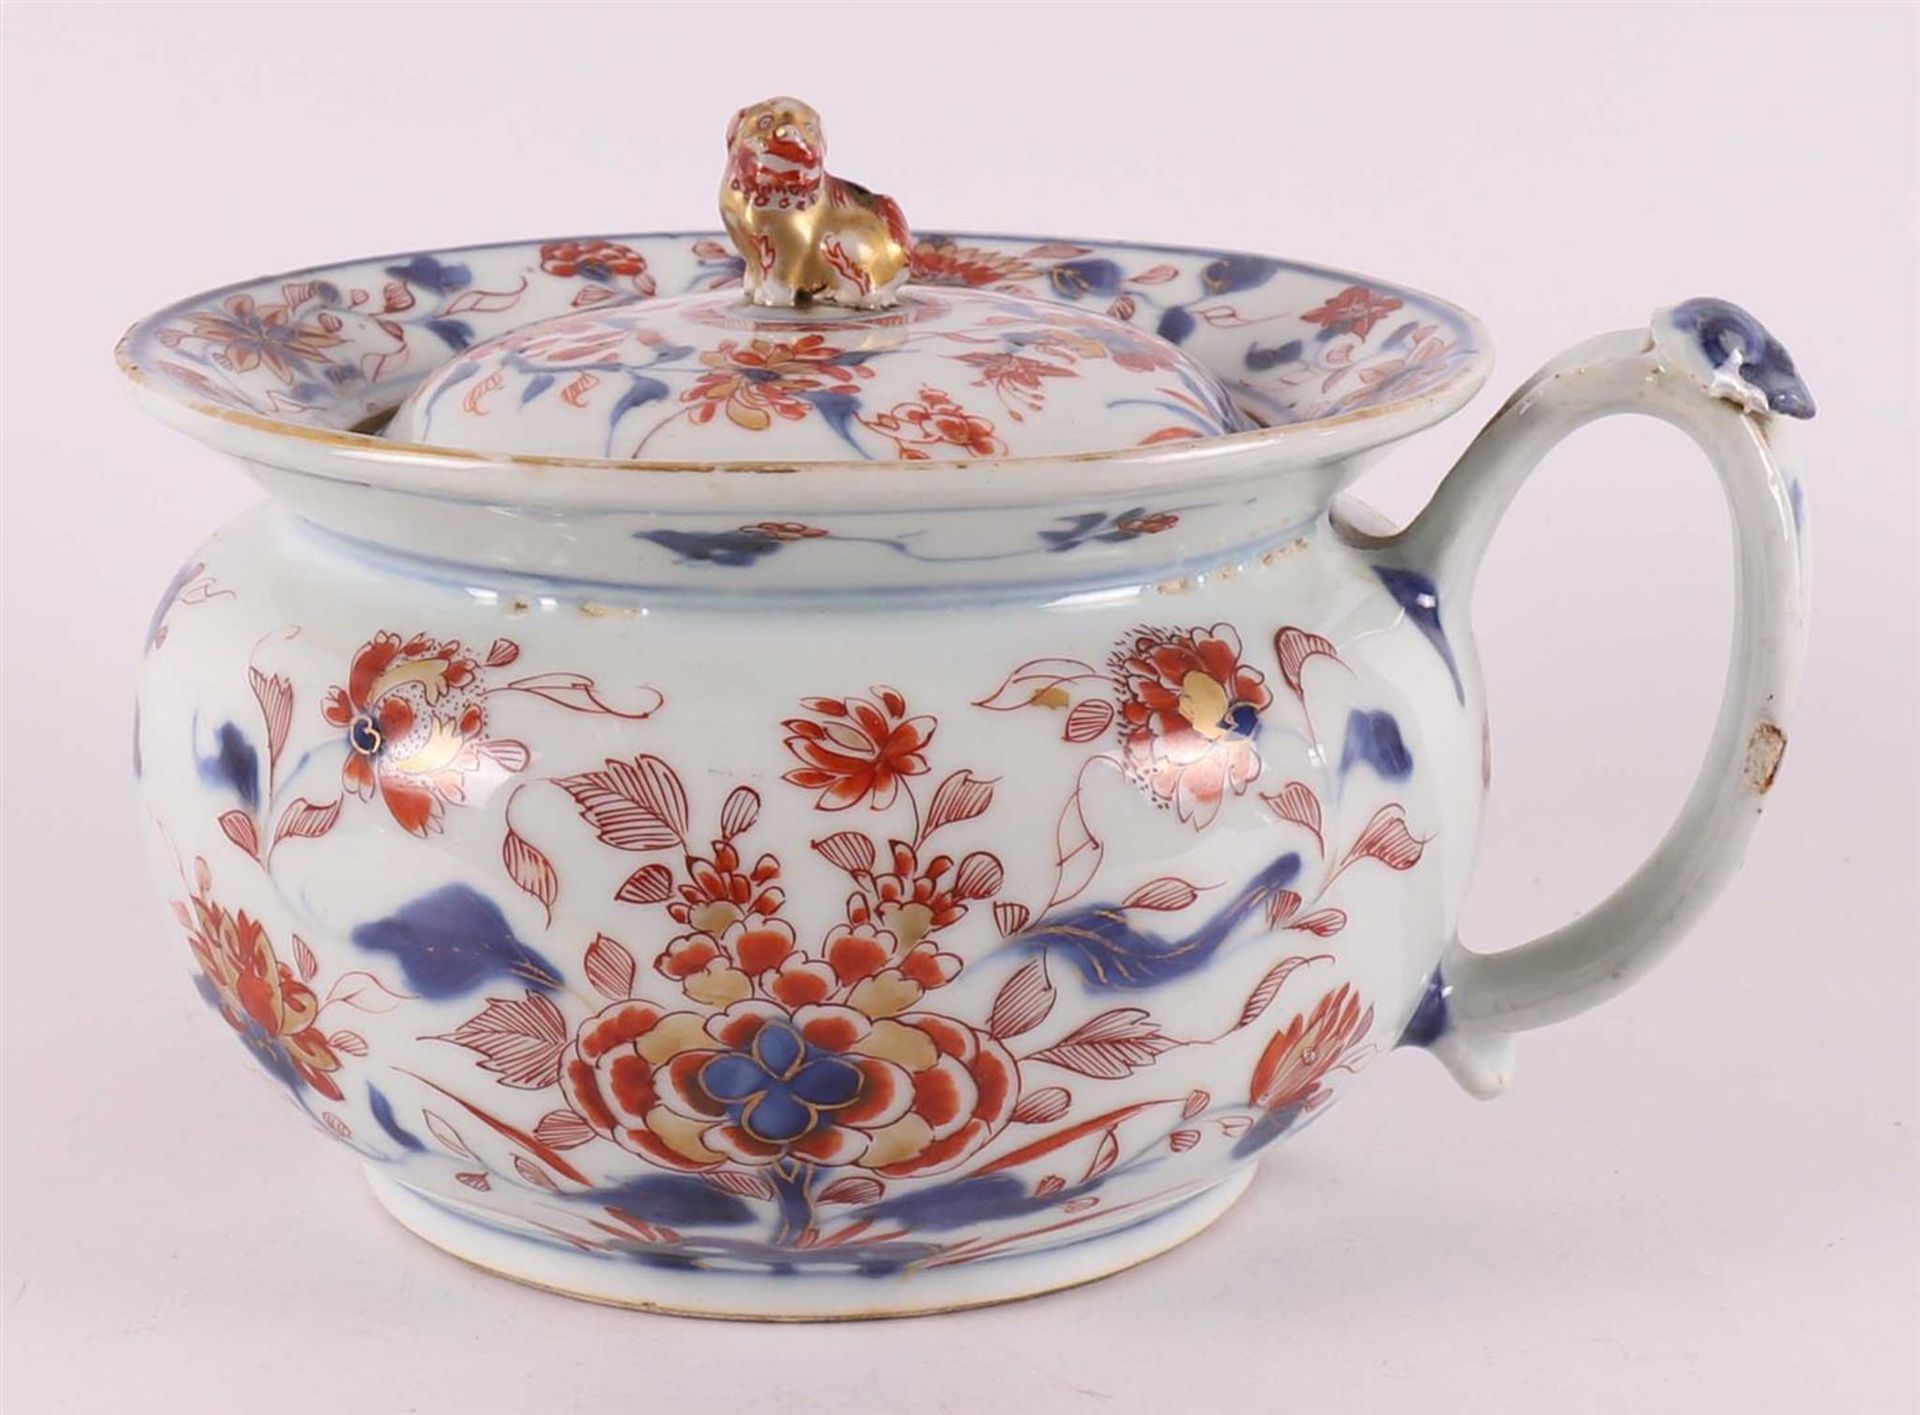 A porcelain Chinese Imari chamber pot, so-called night mirror, with lid, China, 